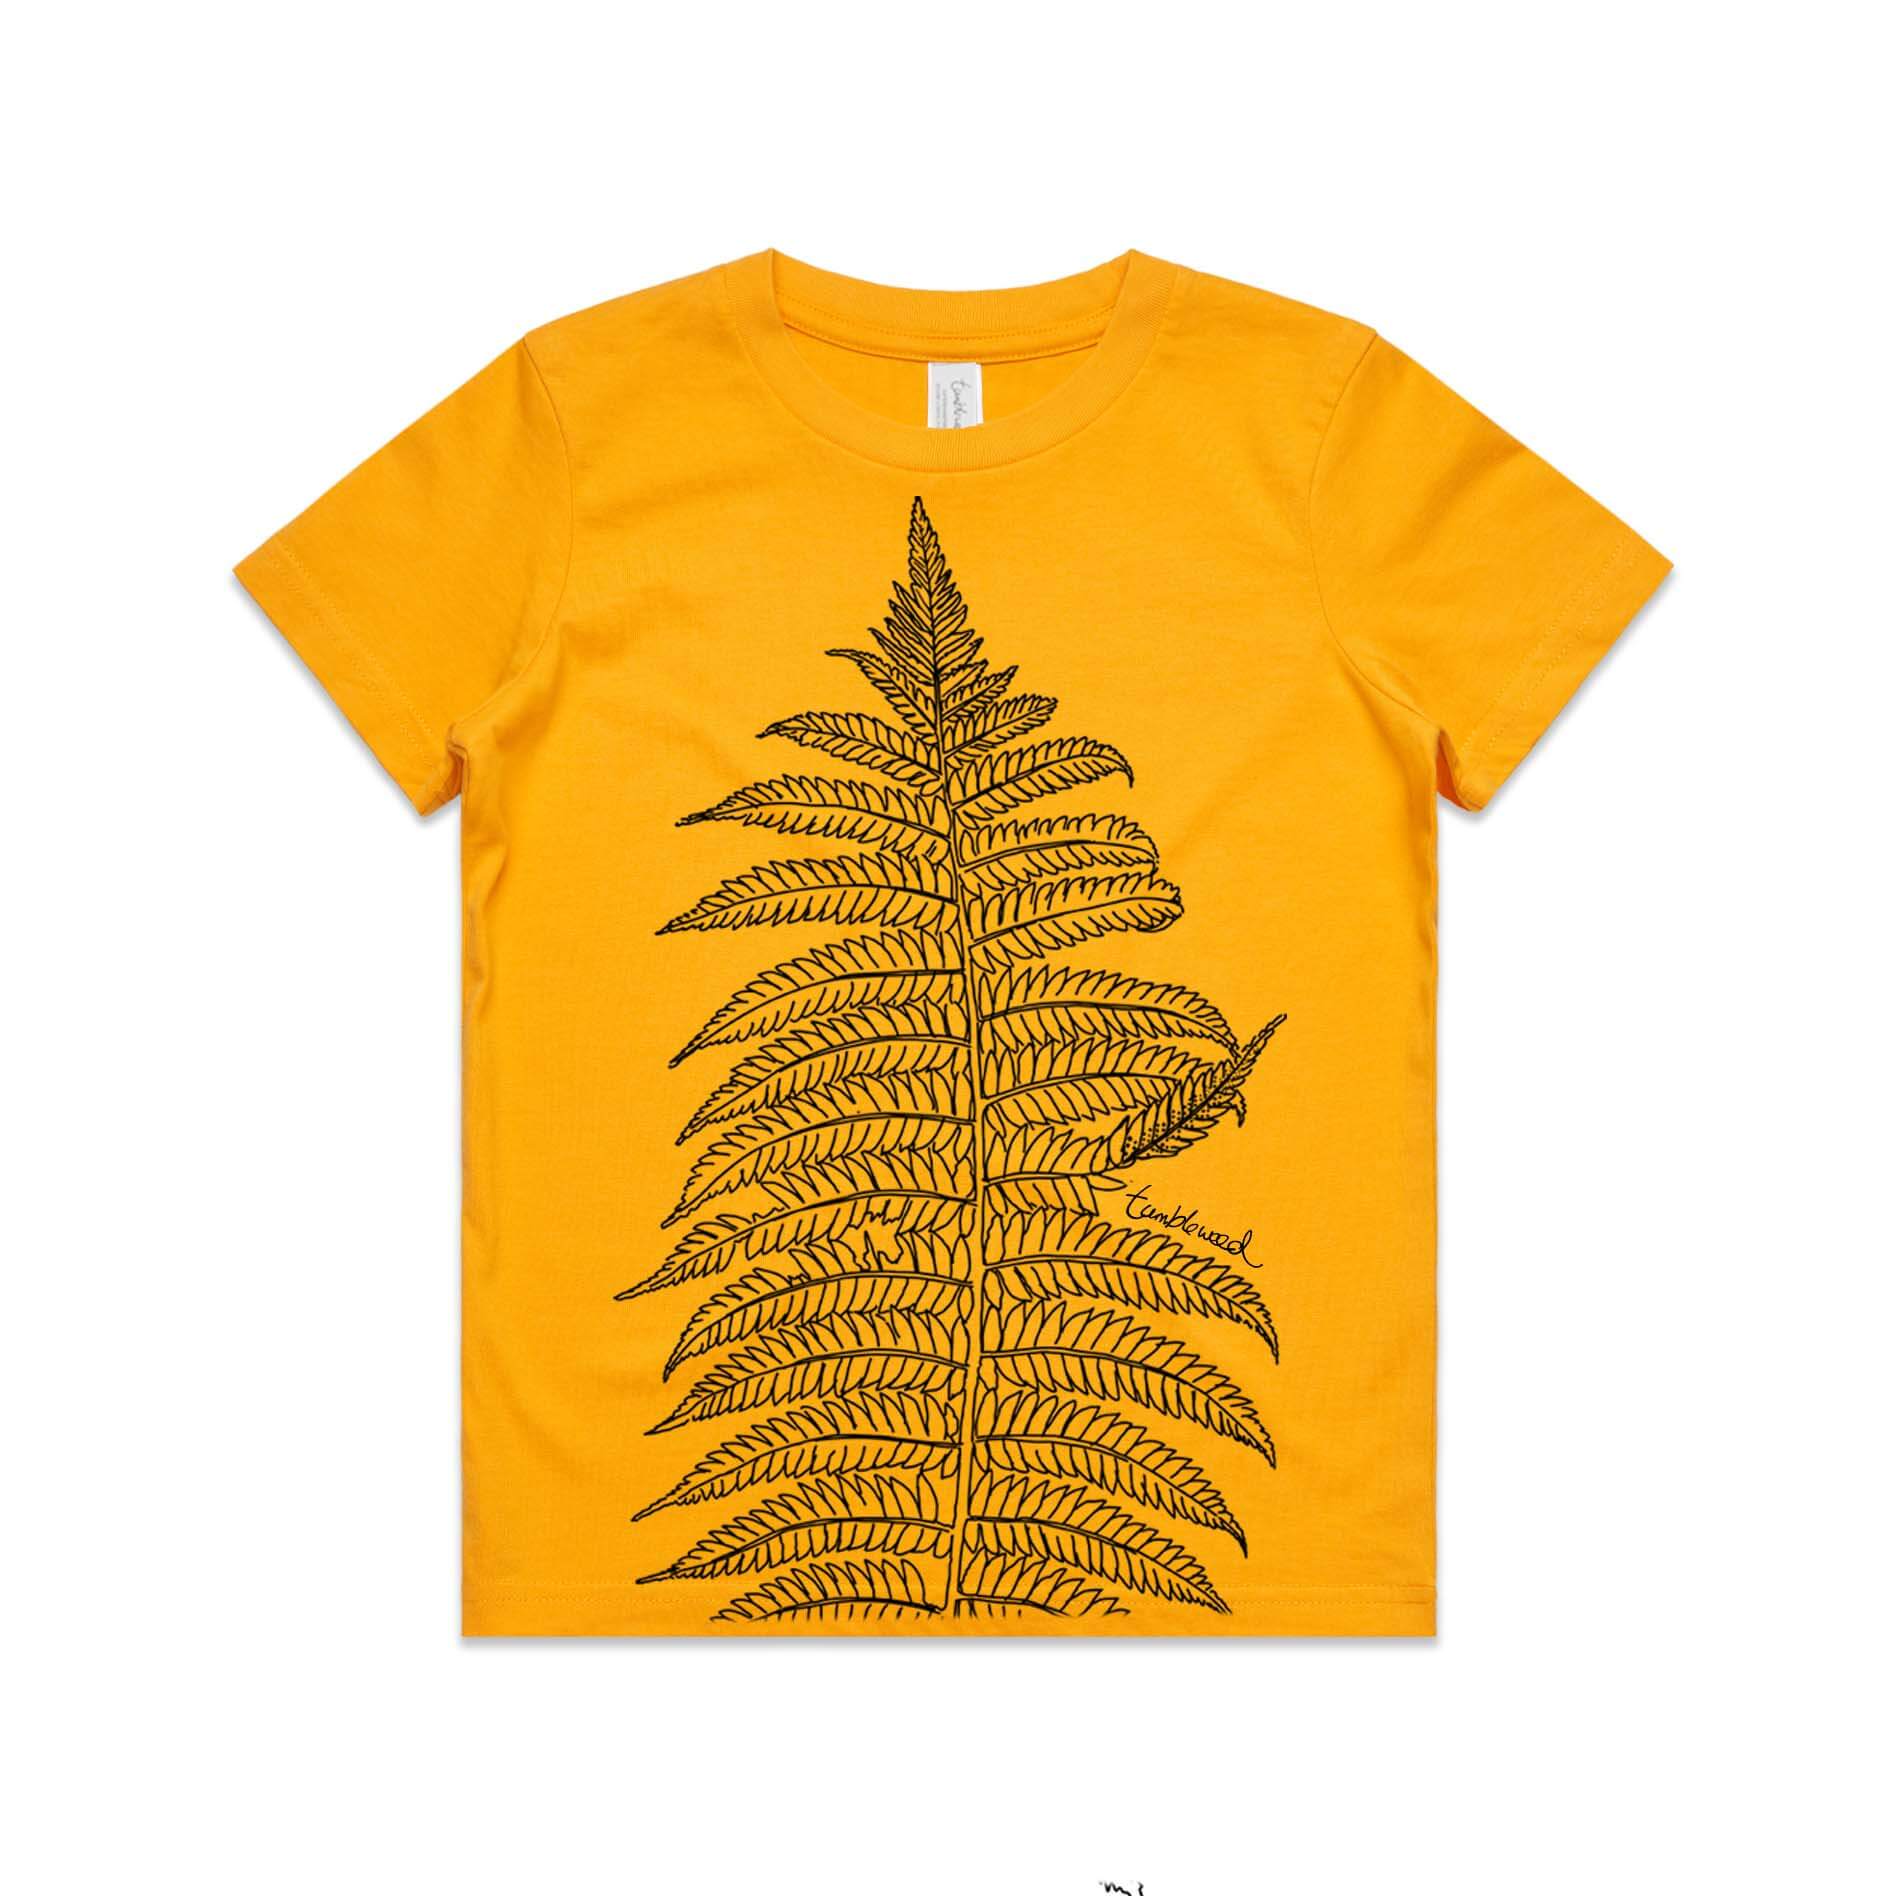 Gold, cotton kids' t-shirt with screen printed Silver fern/ponga design.